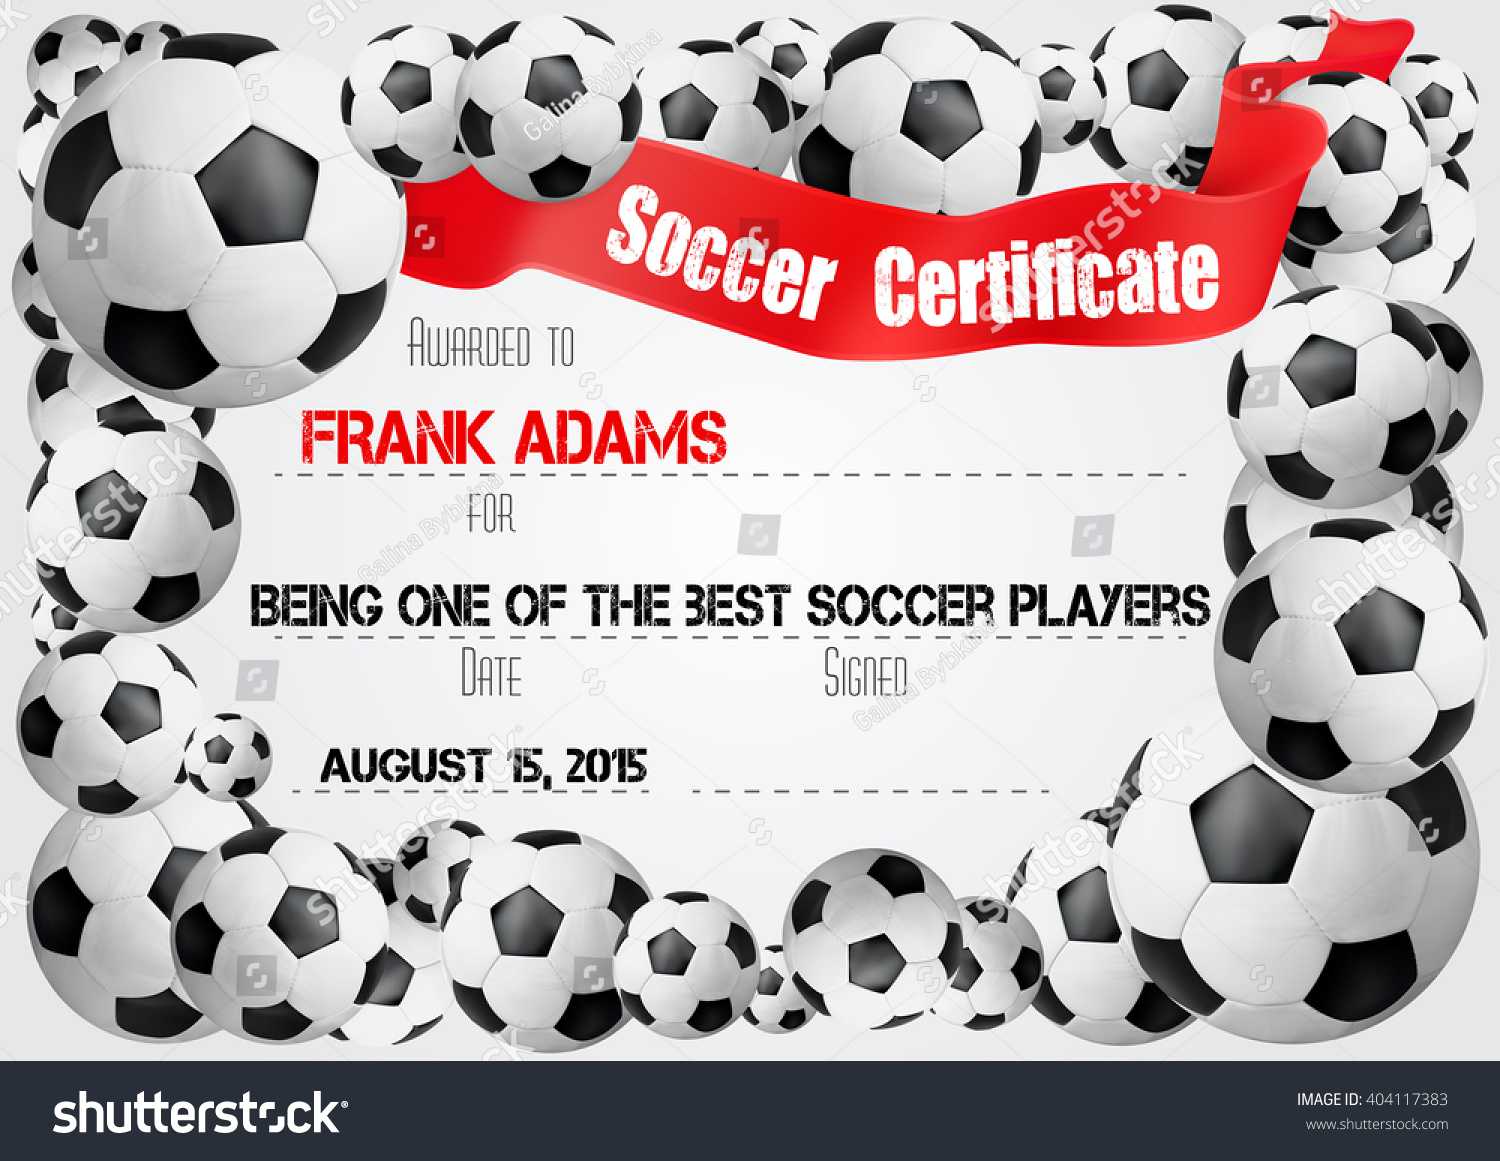 Soccer Certificate Template Football Ball Icons Stock Vector Pertaining To Soccer Certificate Template Free